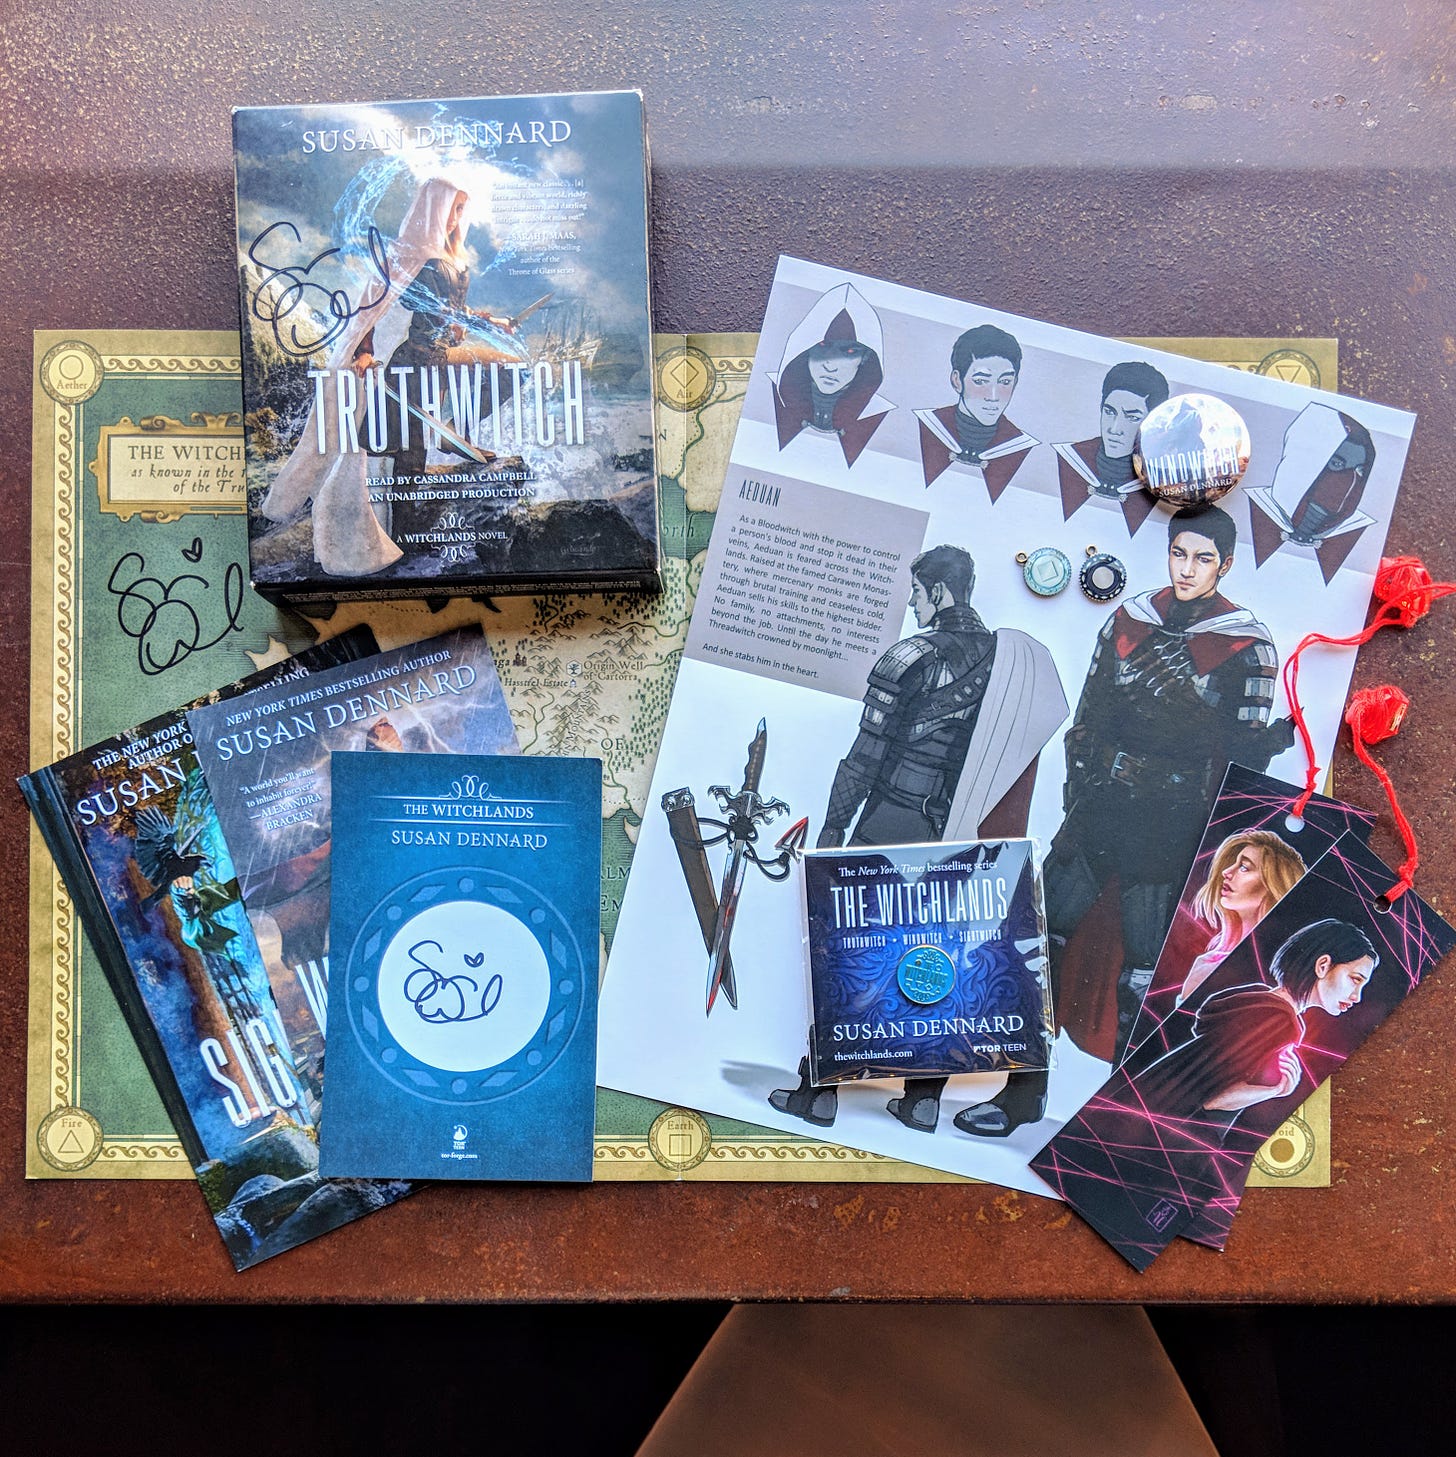 Examples of Witchlands swag including bookmarks, post cards, book plates, buttons, pins, charms, posters, and maps